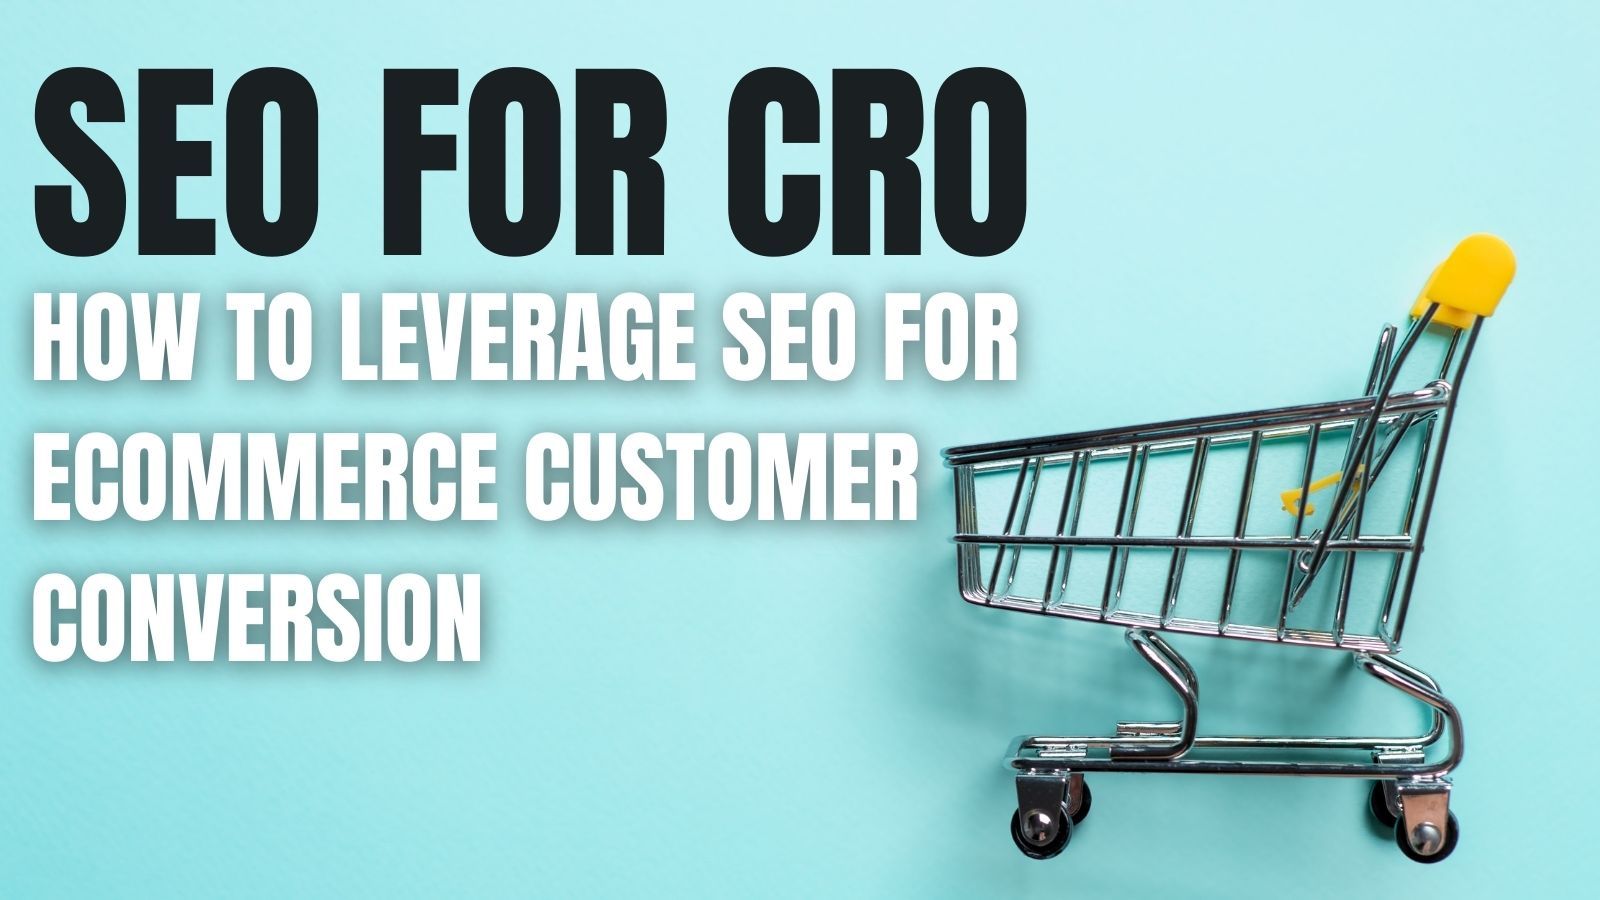 SEO for CRO: The basics and not so basics of getting it right